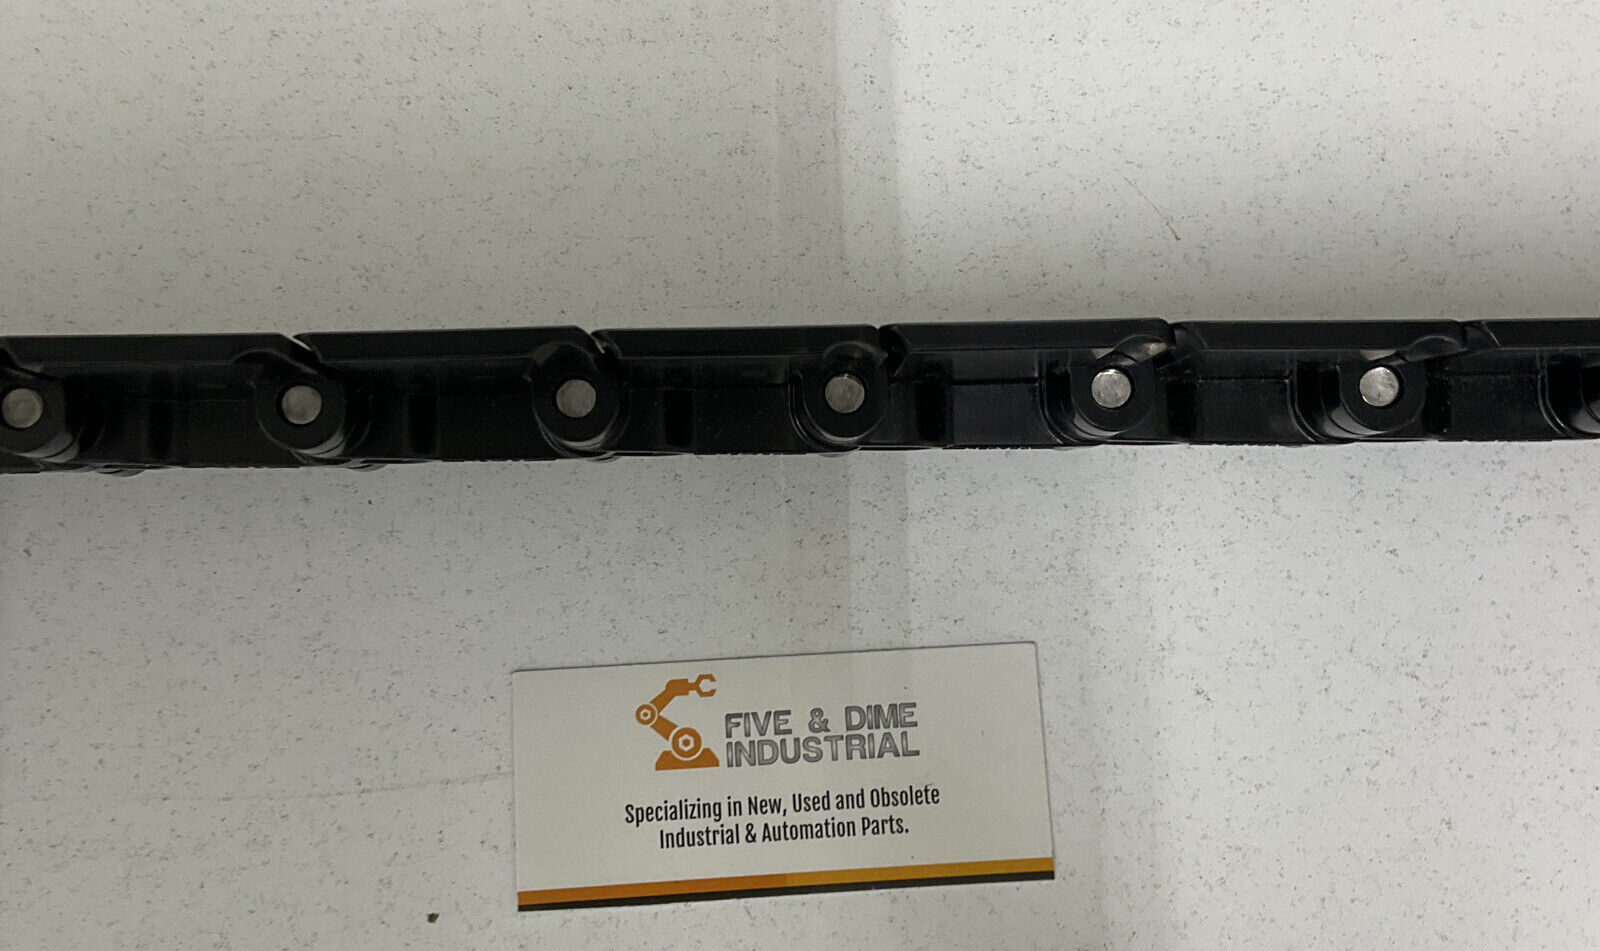 Rexnord AS820-3.25 / AS820-K3.25 Table Top Chain 10' 10156545 (SH112)